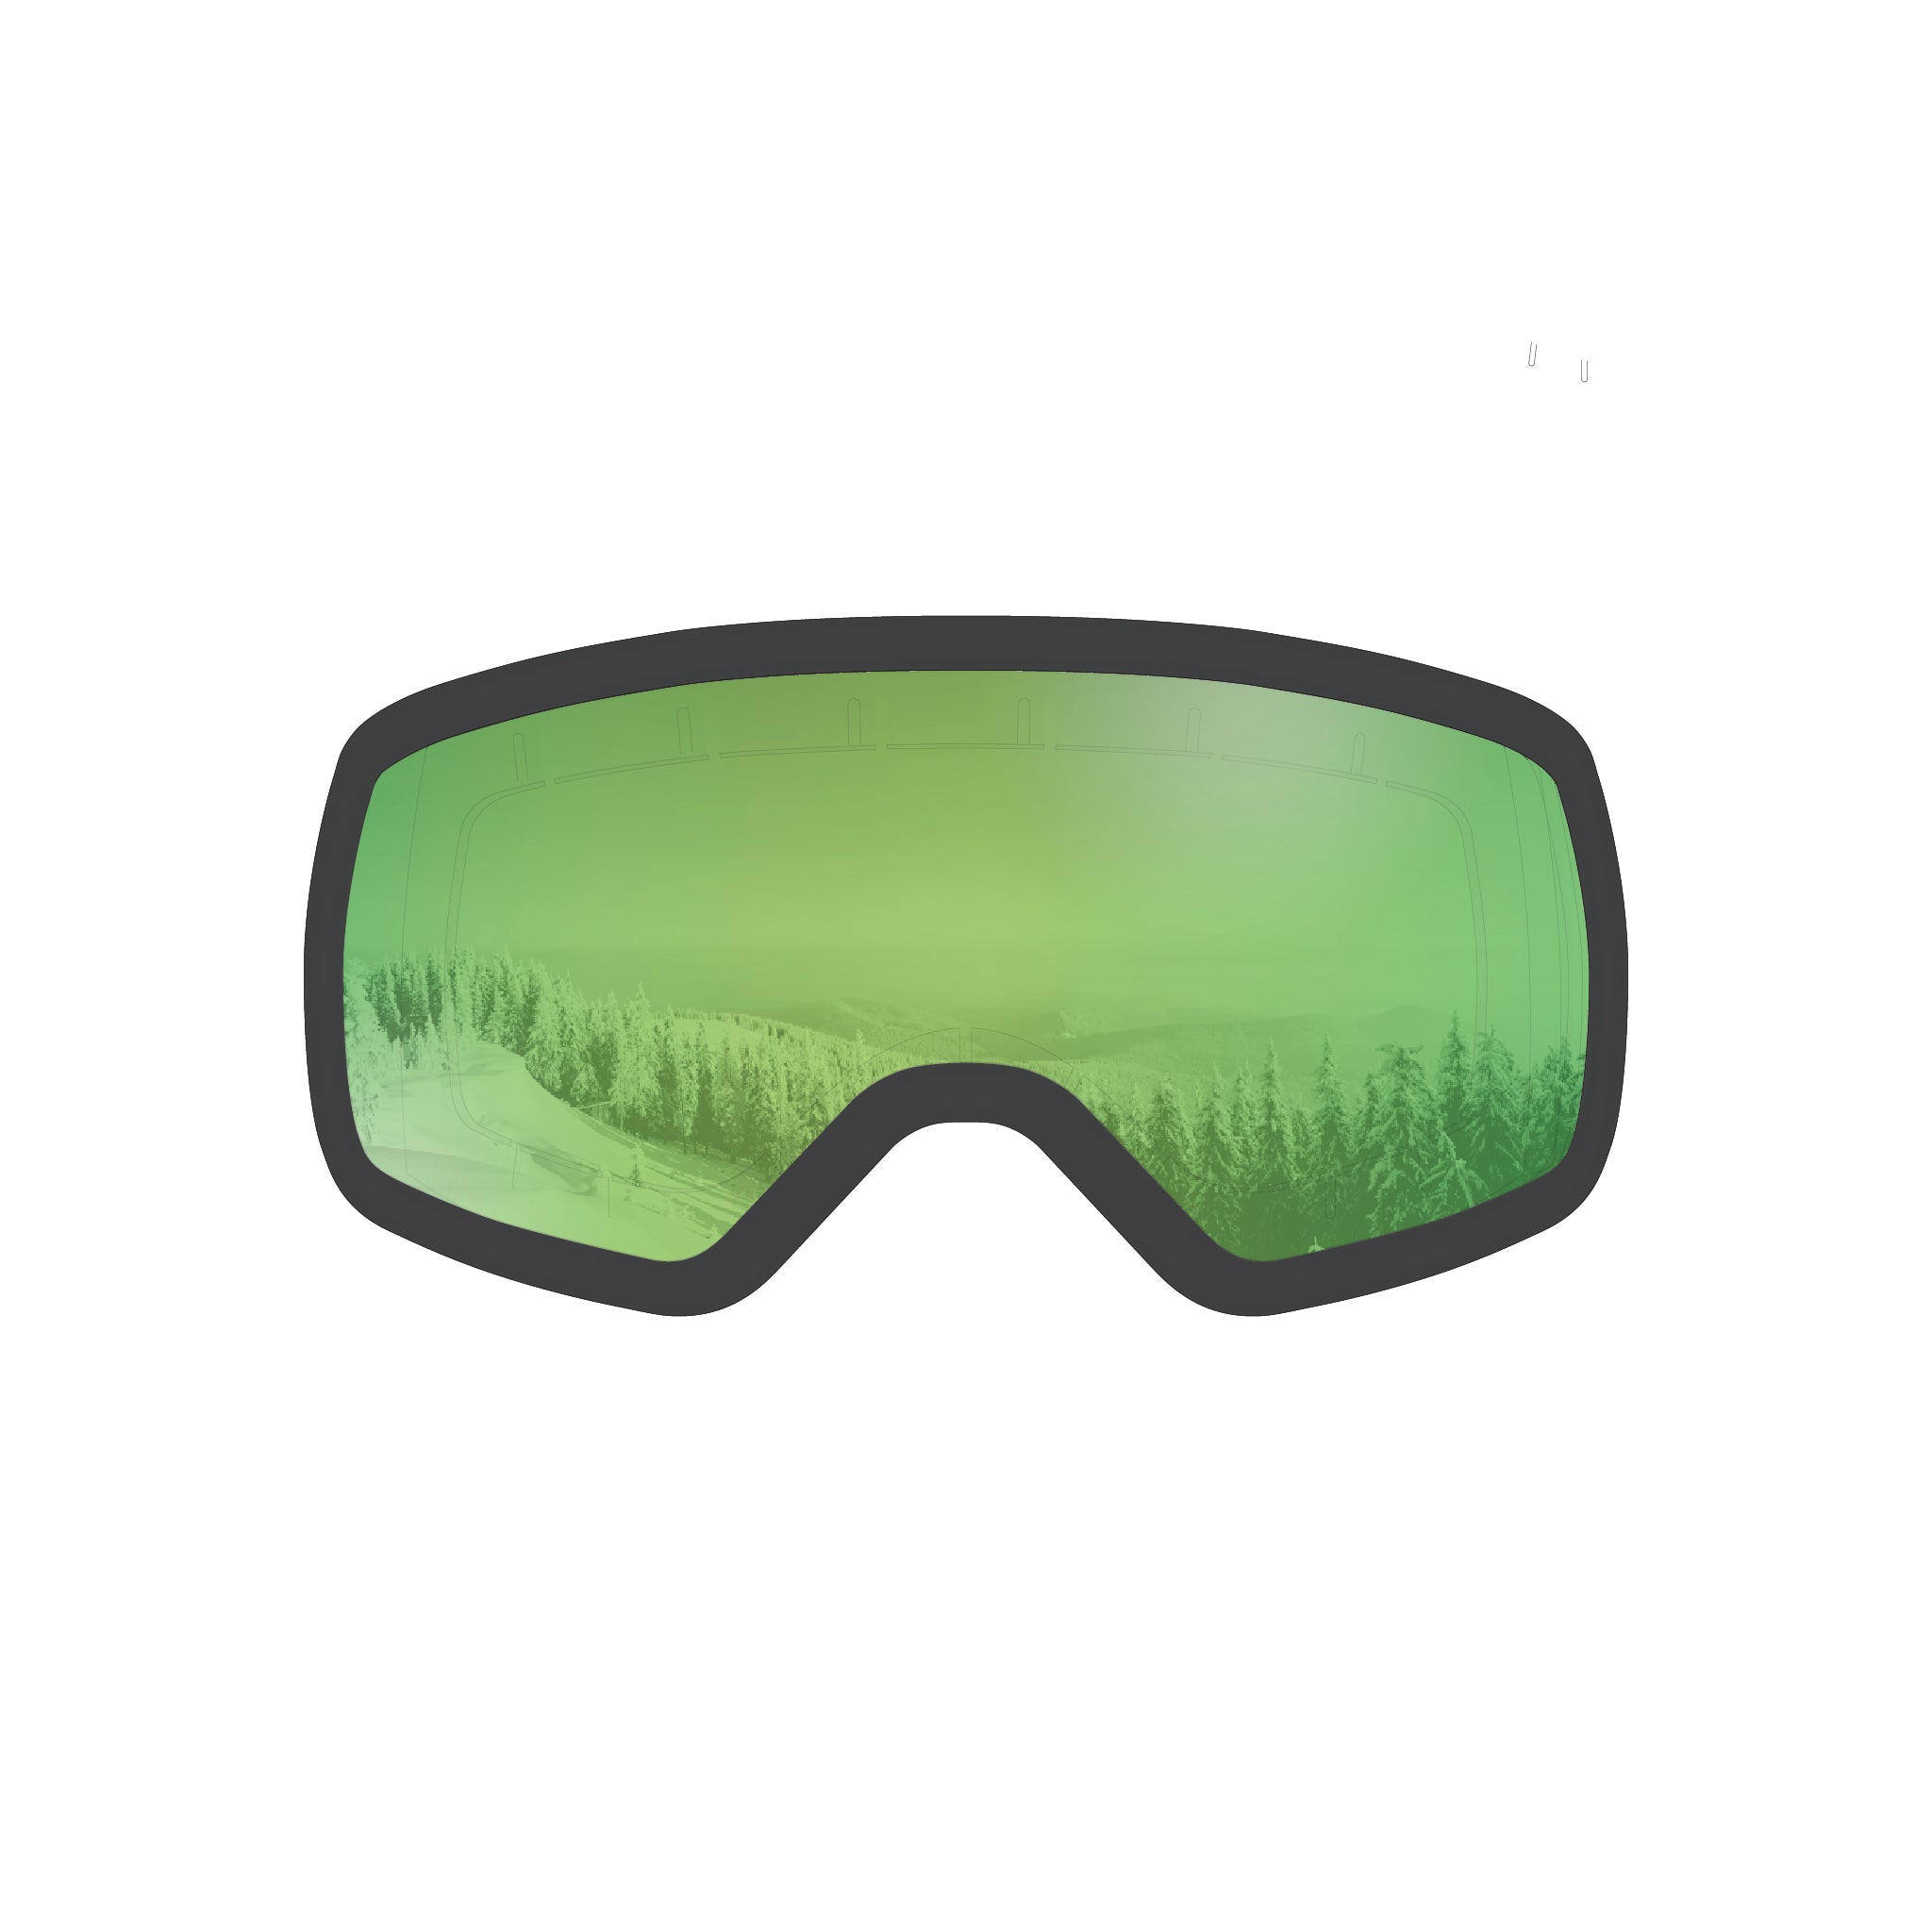 STAGE 8Track Ski Goggle w/ Green Revo Lens and Black Frame - Fits teens, ages 9 -13. Youth ski goggle.